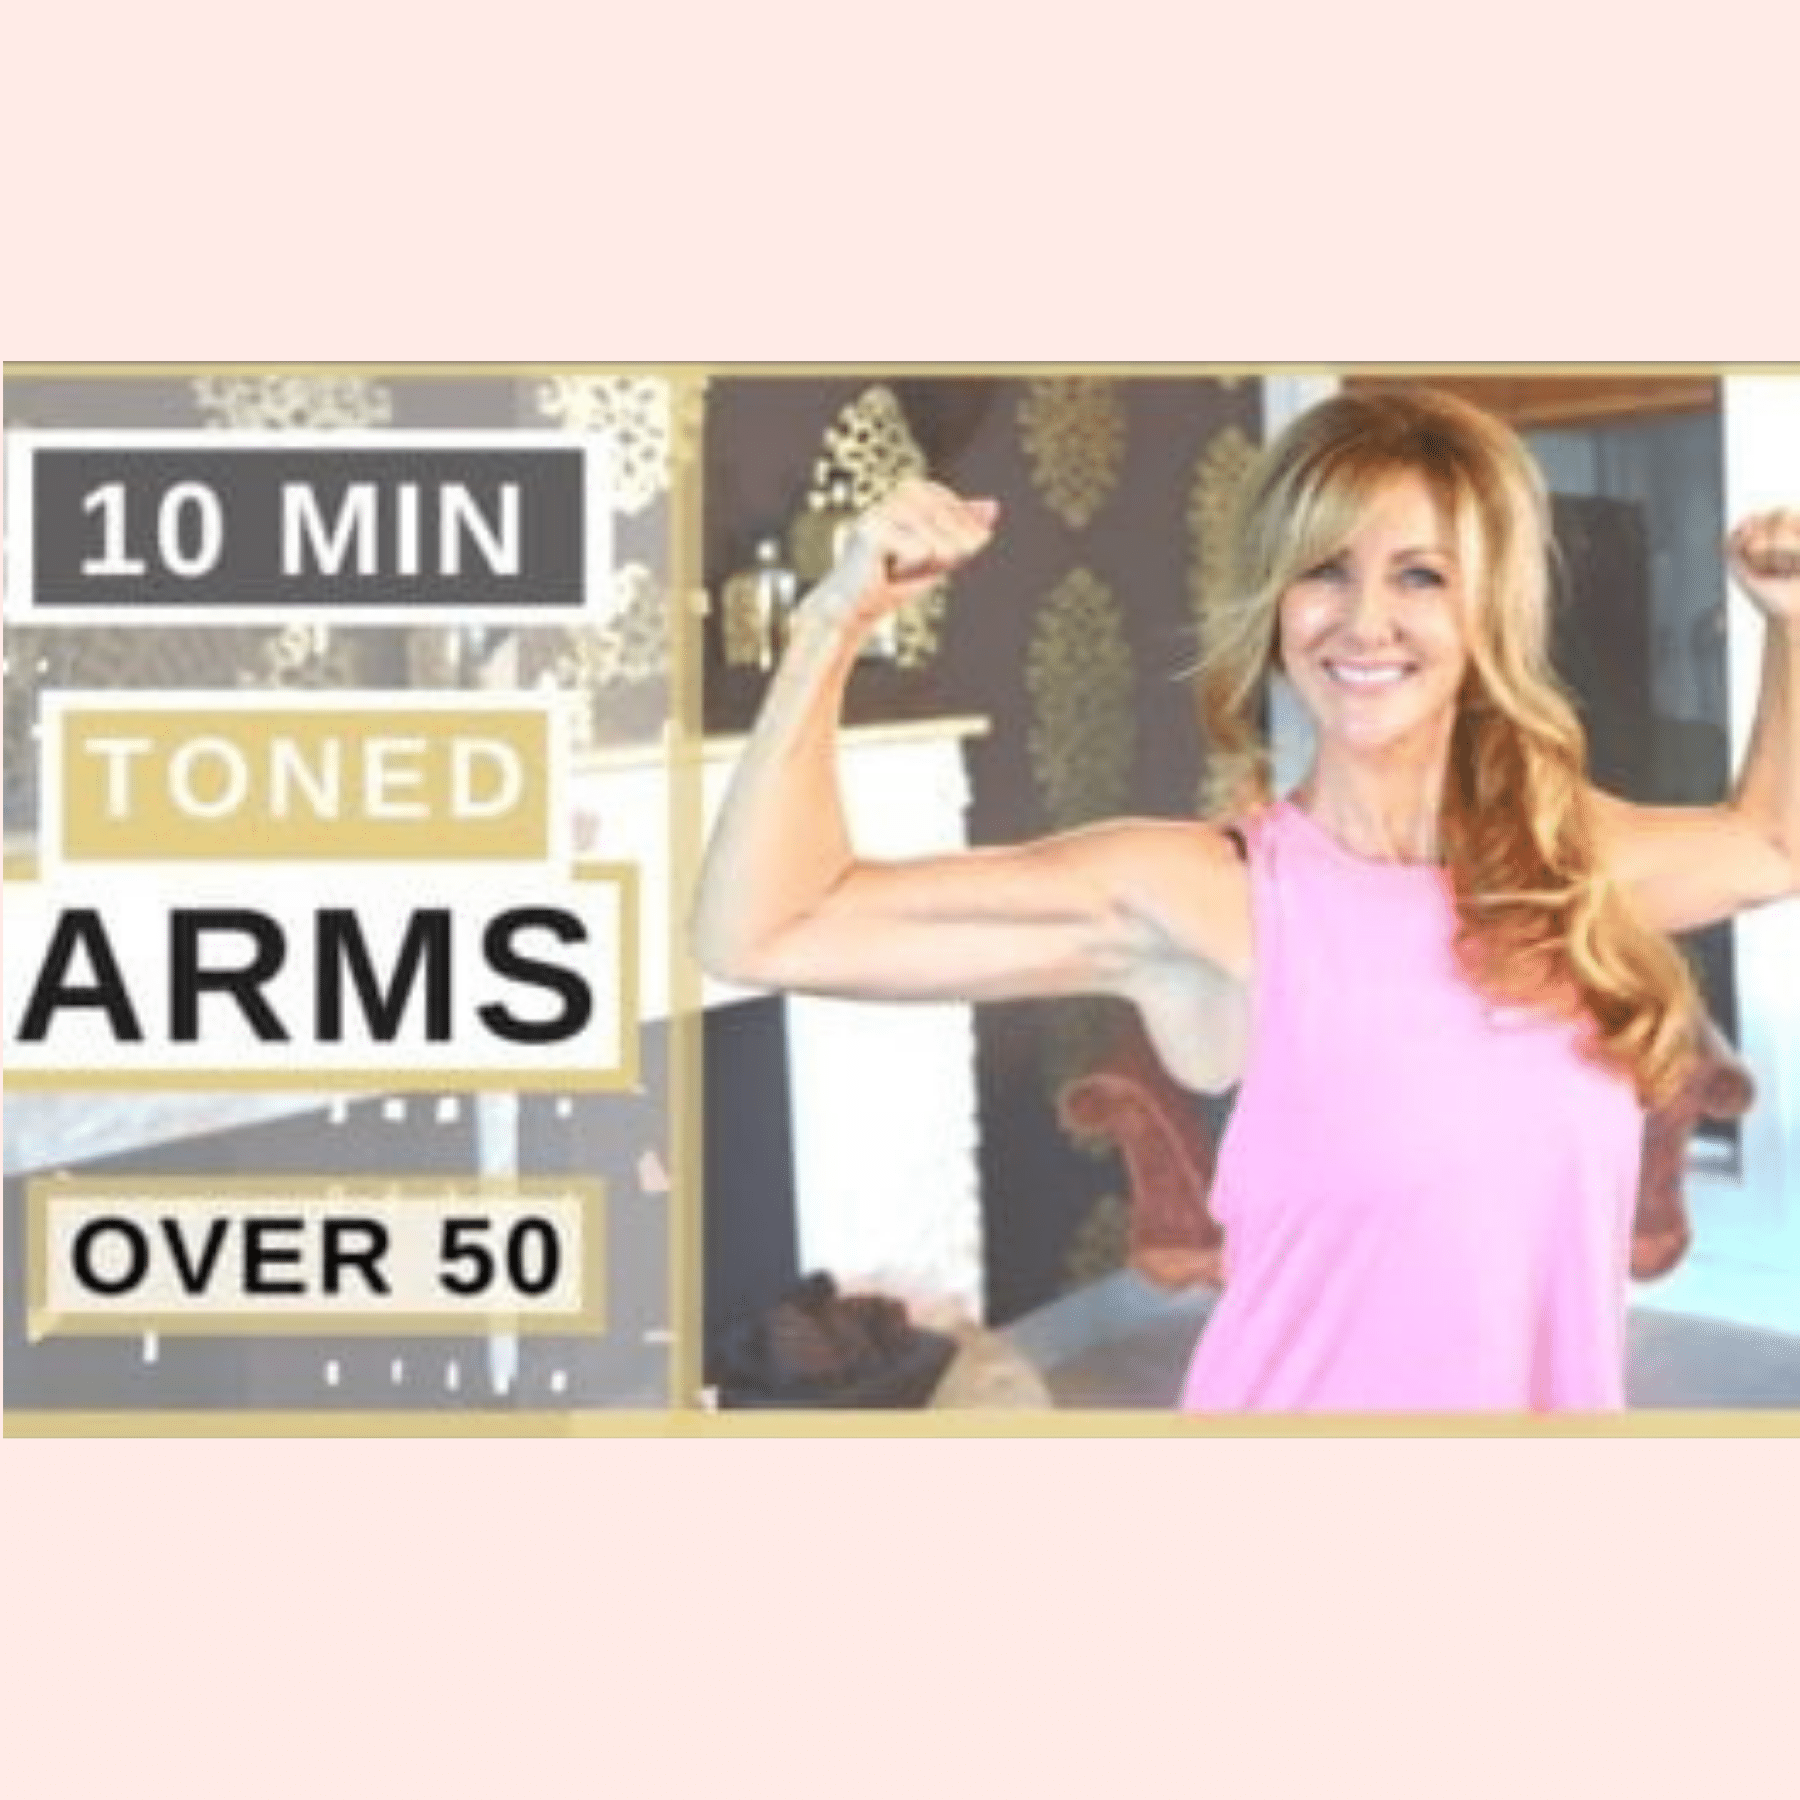 10 MIN ARMS WORKOUT FOR TONED ARMS